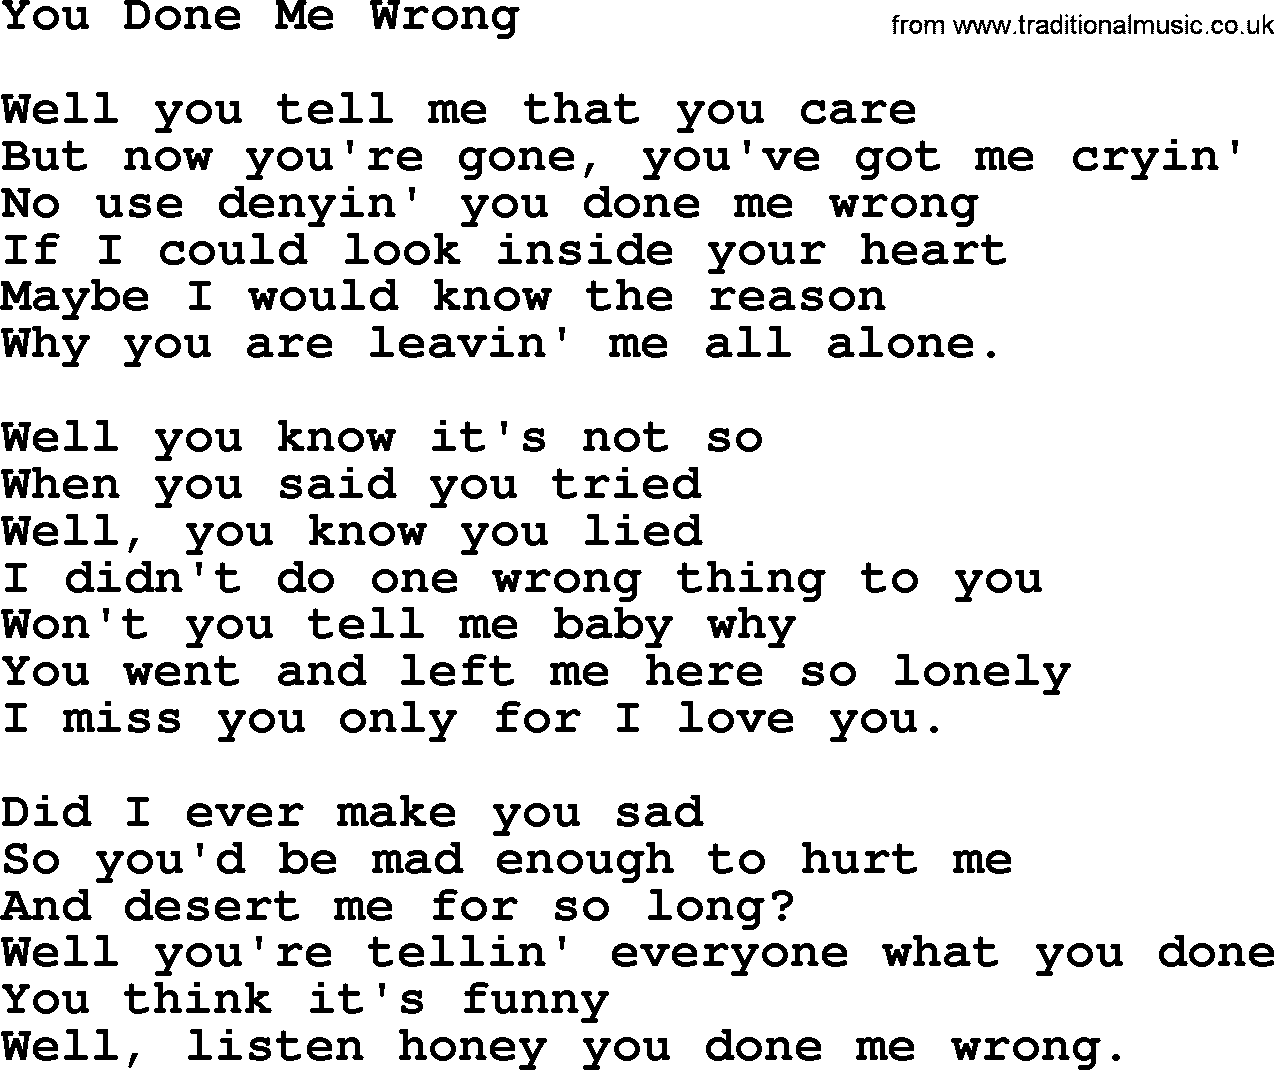 Willie Nelson song: You Done Me Wrong lyrics